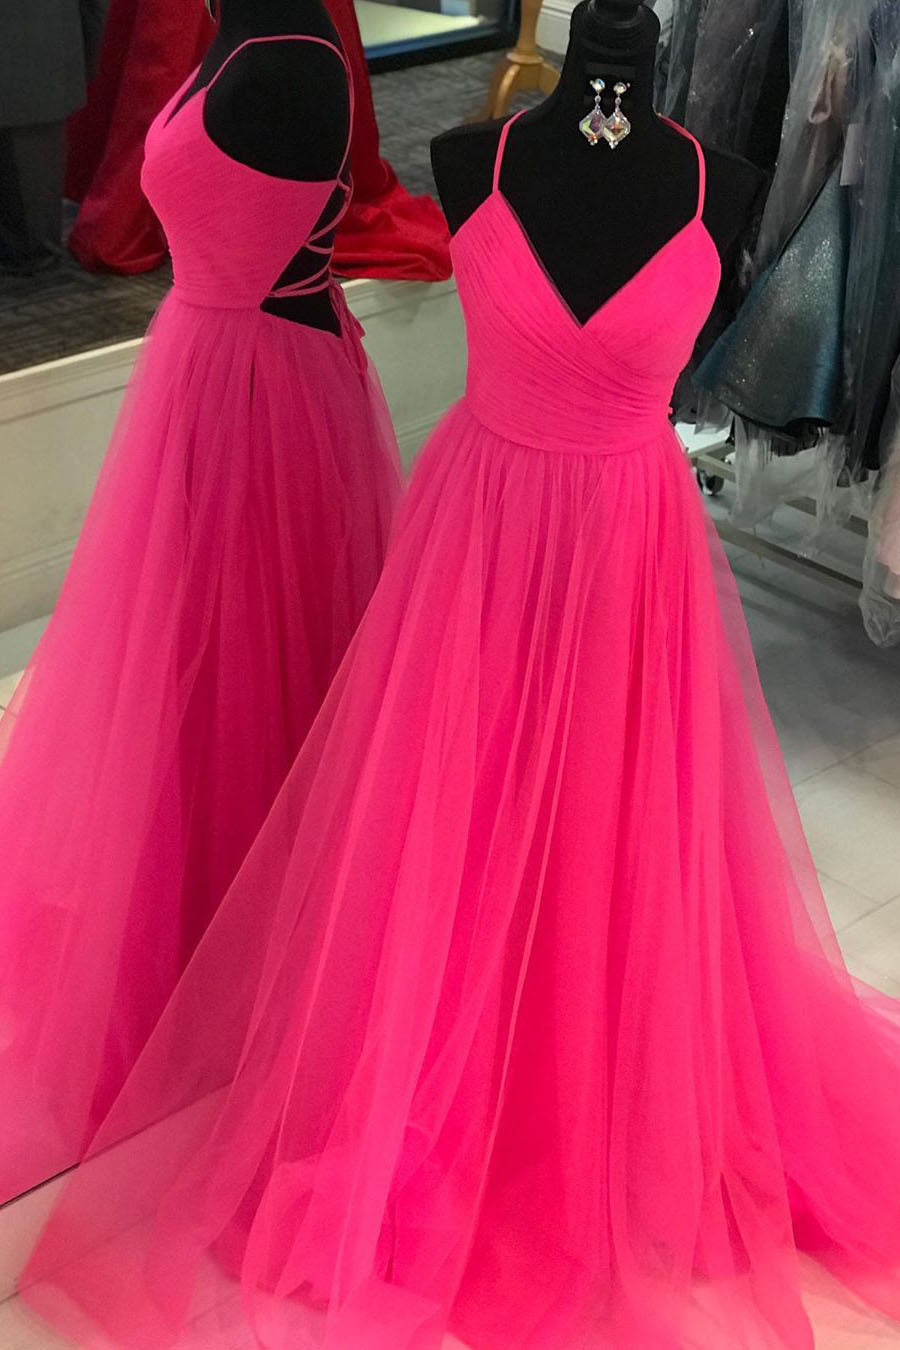 V Neck A-line Hot Pink Long Prom Dress Outfits For Women with Lace-up Back